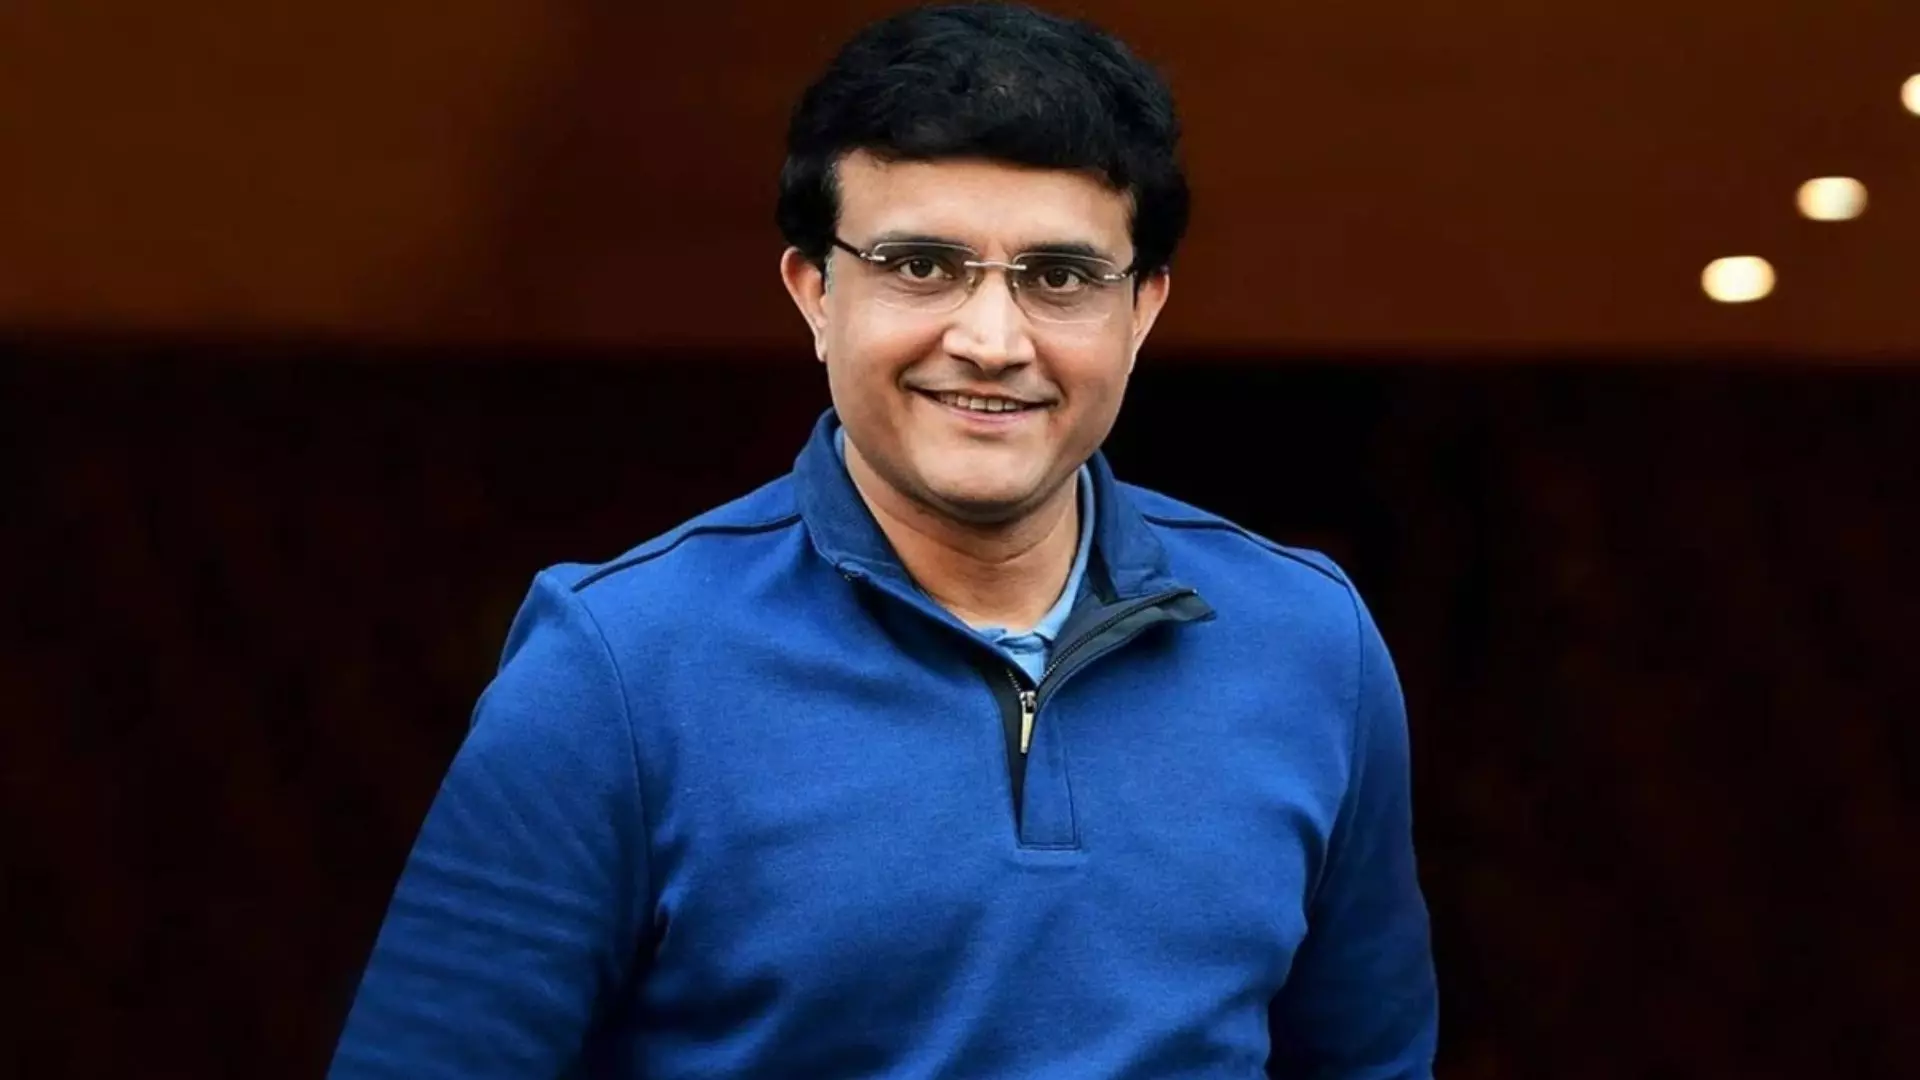 Movie Makers Planning to do Biopic on Sourav Ganguly